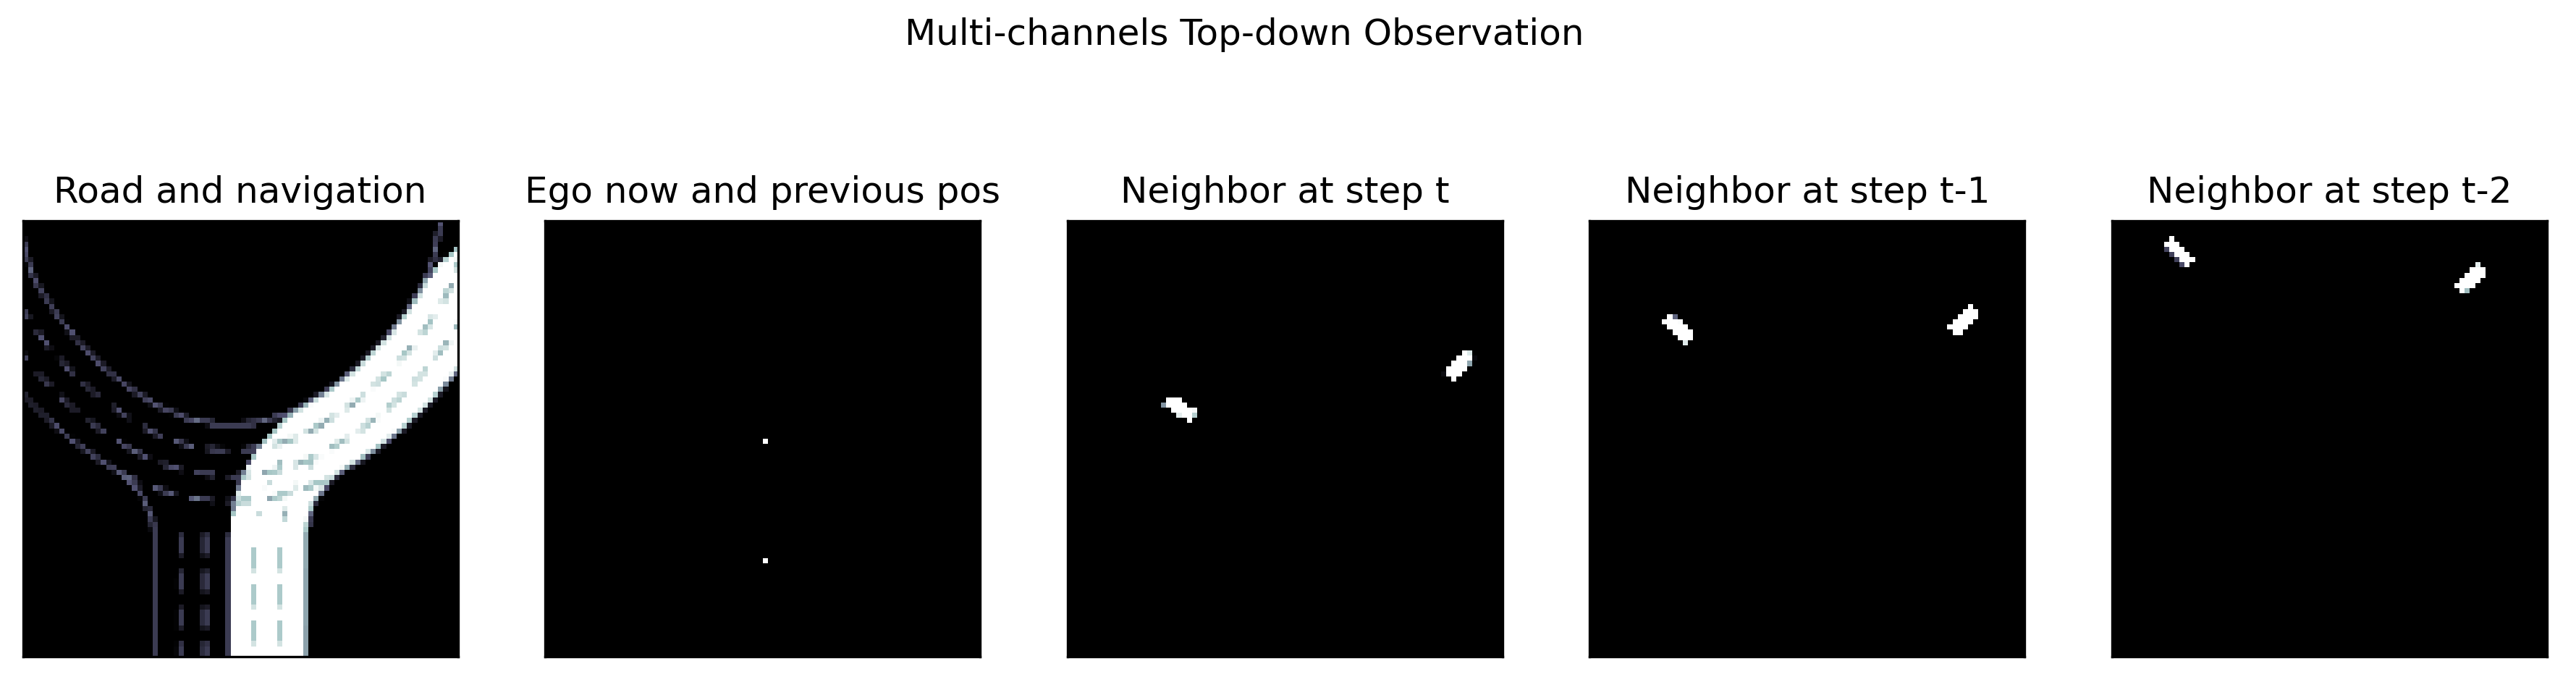 _images/top_down_obs.png